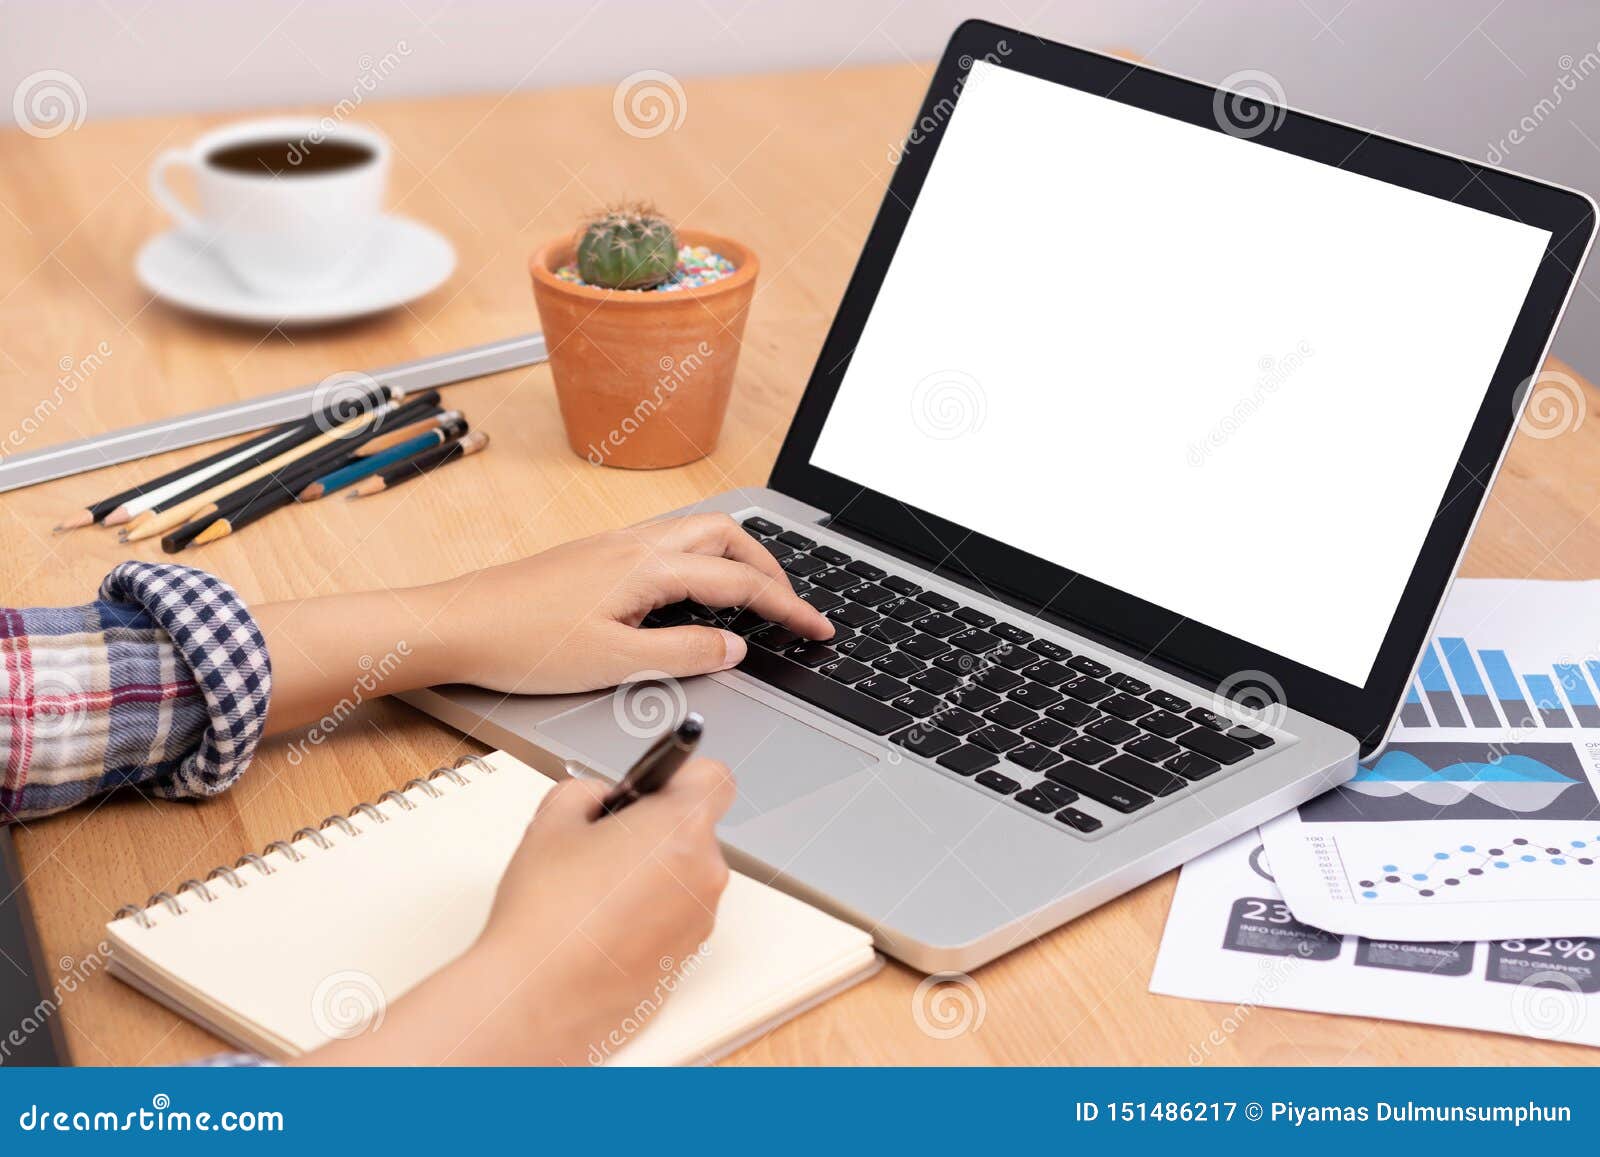 online learning course concept. student using computer laptop with white blank screen for training online and writing lecture note